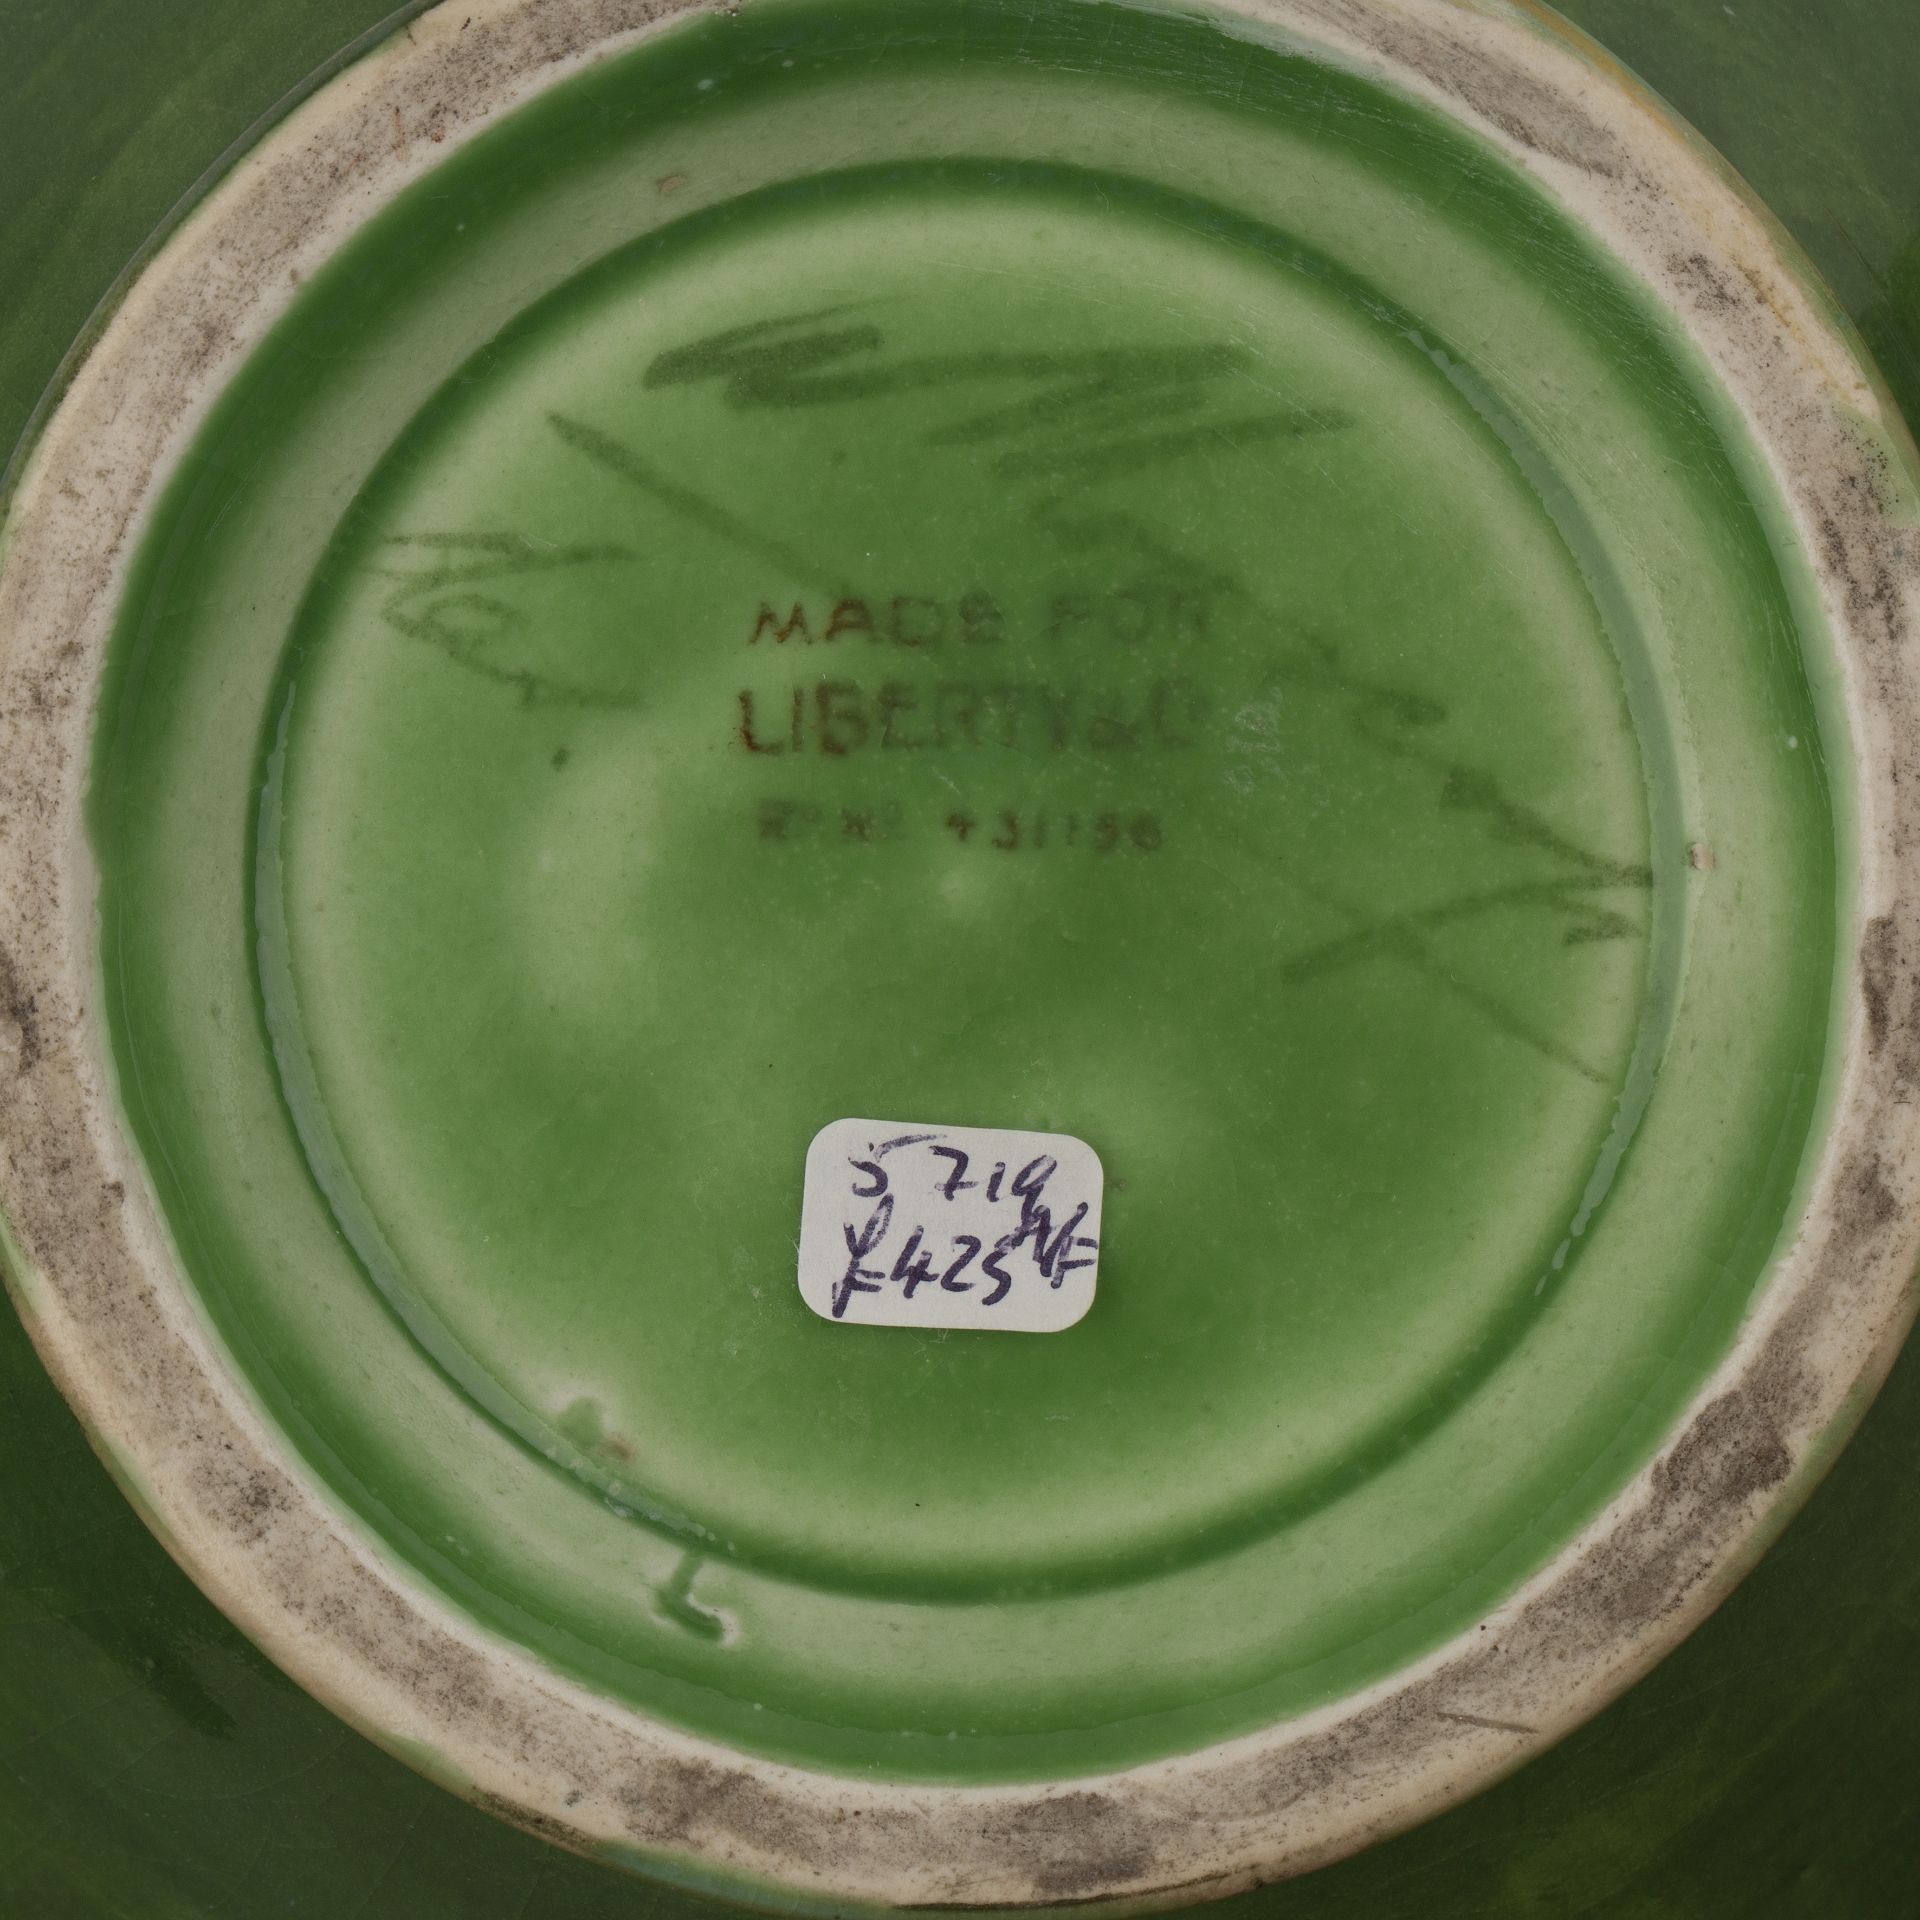 William Moorcroft (1872-1945) for Liberty and Co 'Flamminian ware' in green colourway, with - Bild 3 aus 6